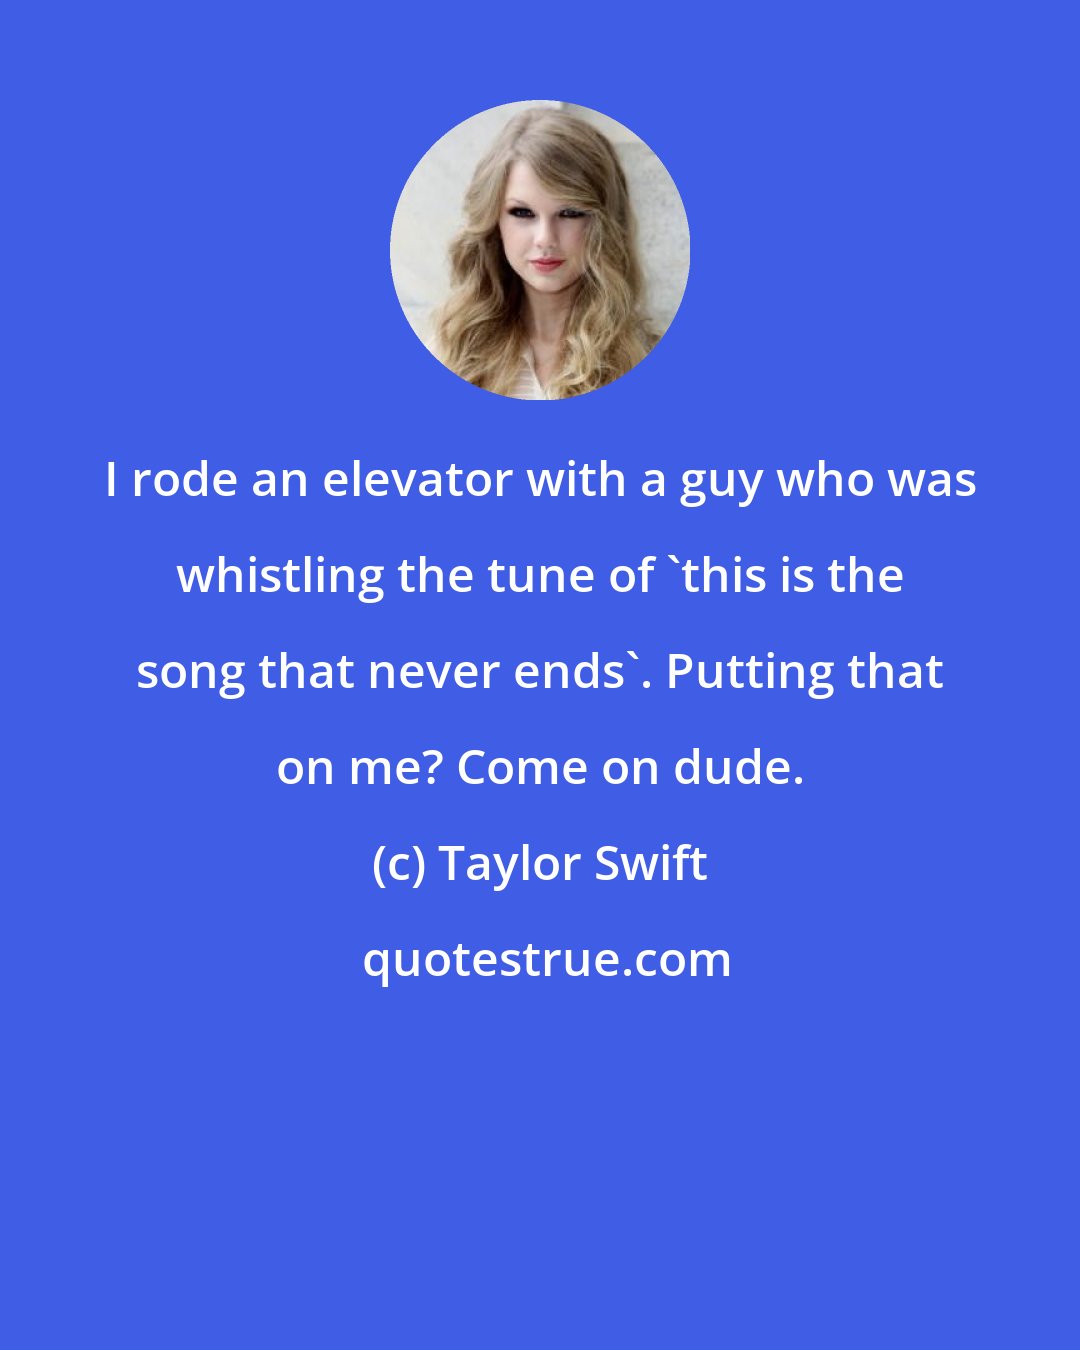 Taylor Swift: I rode an elevator with a guy who was whistling the tune of 'this is the song that never ends'. Putting that on me? Come on dude.